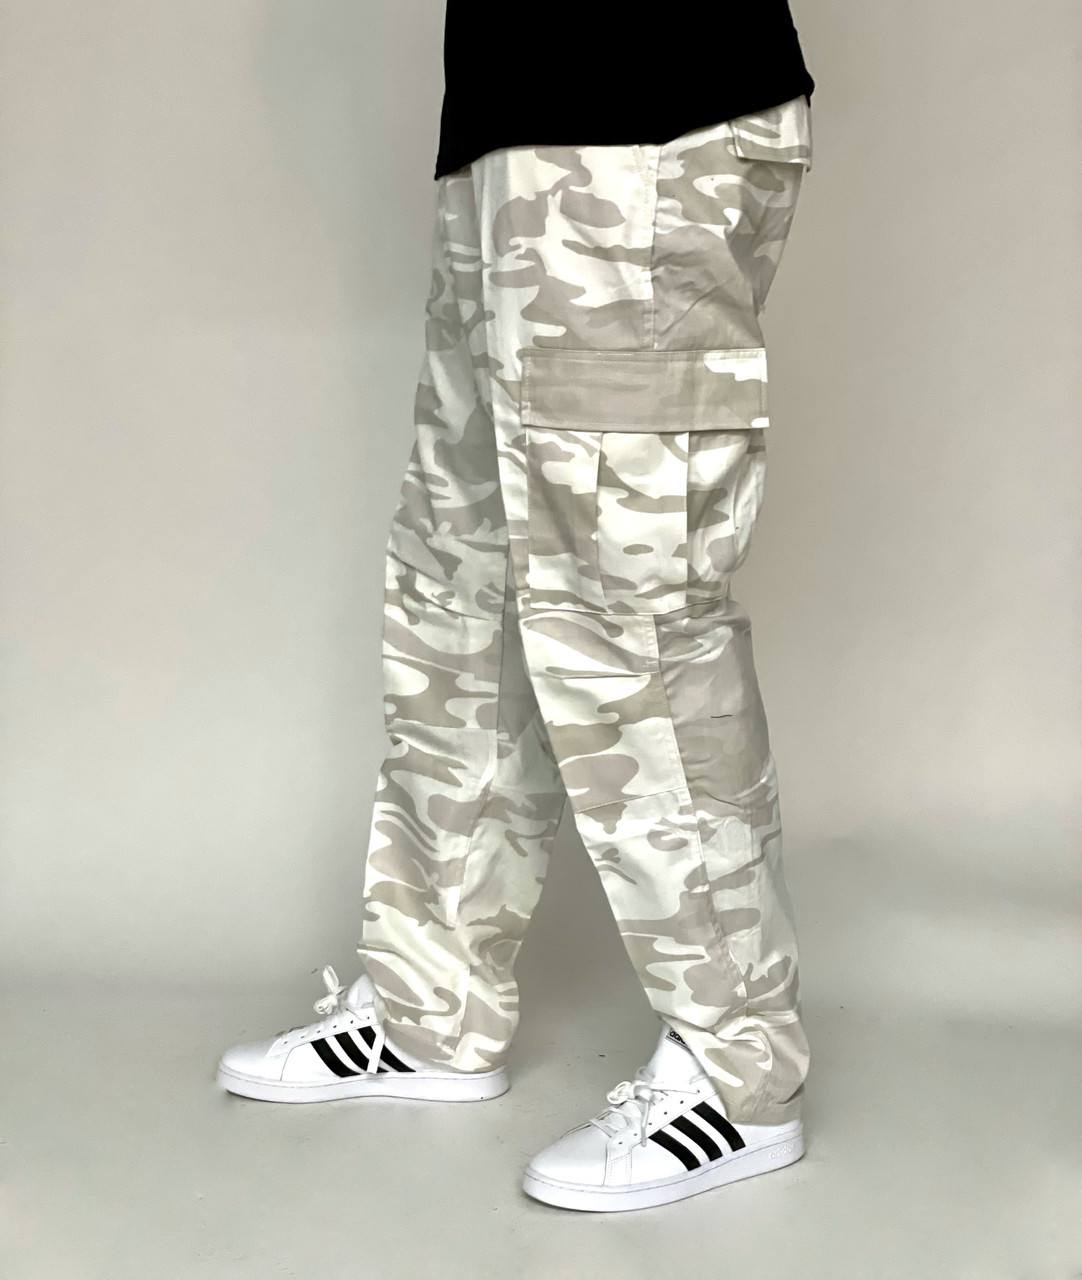 https://cdn11.bigcommerce.com/s-uuik8n4qcj/images/stencil/1280x1280/products/7724/11489/white_camo_cargo_pocket_pants_for_men_2__19837.1673286786.jpg?c=2?imbypass=on